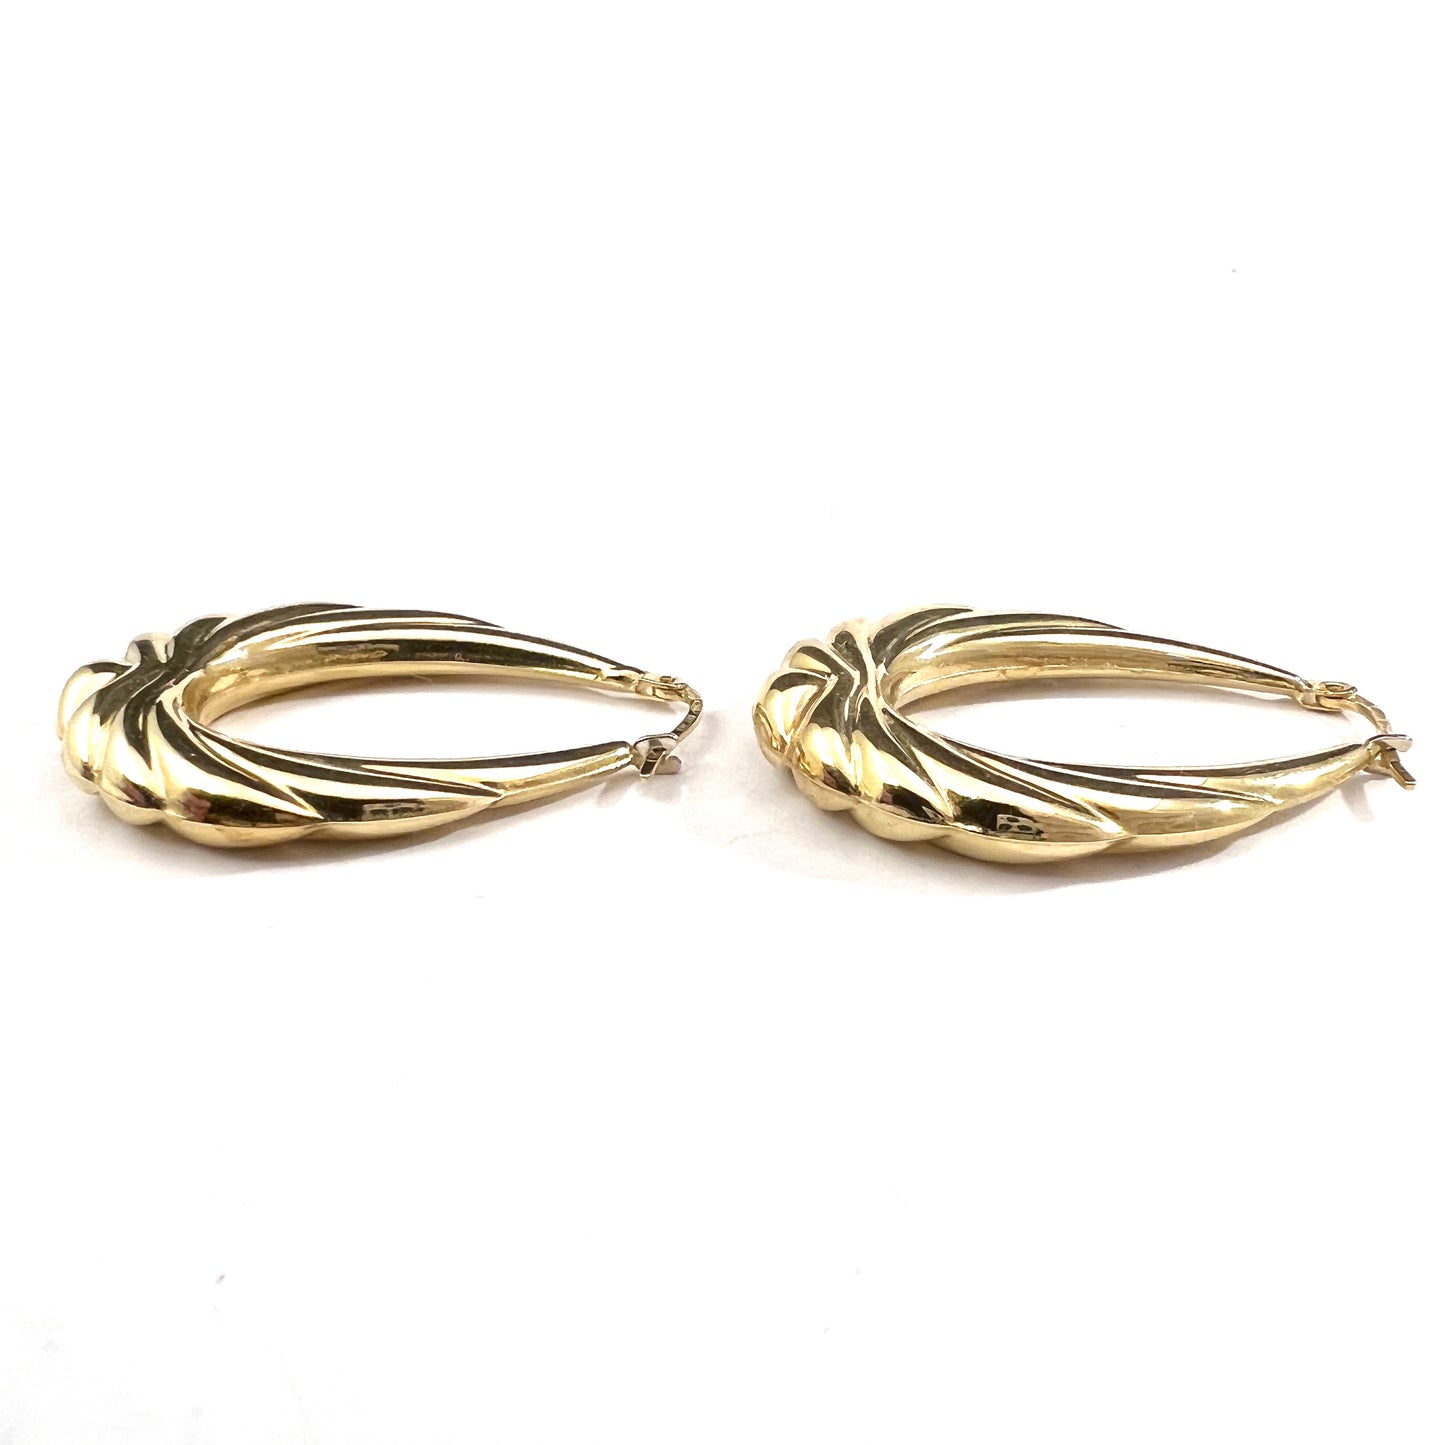 Uno A Erre, Arezzo, Italy 1970-80s. Large 18k Gold Earrings.